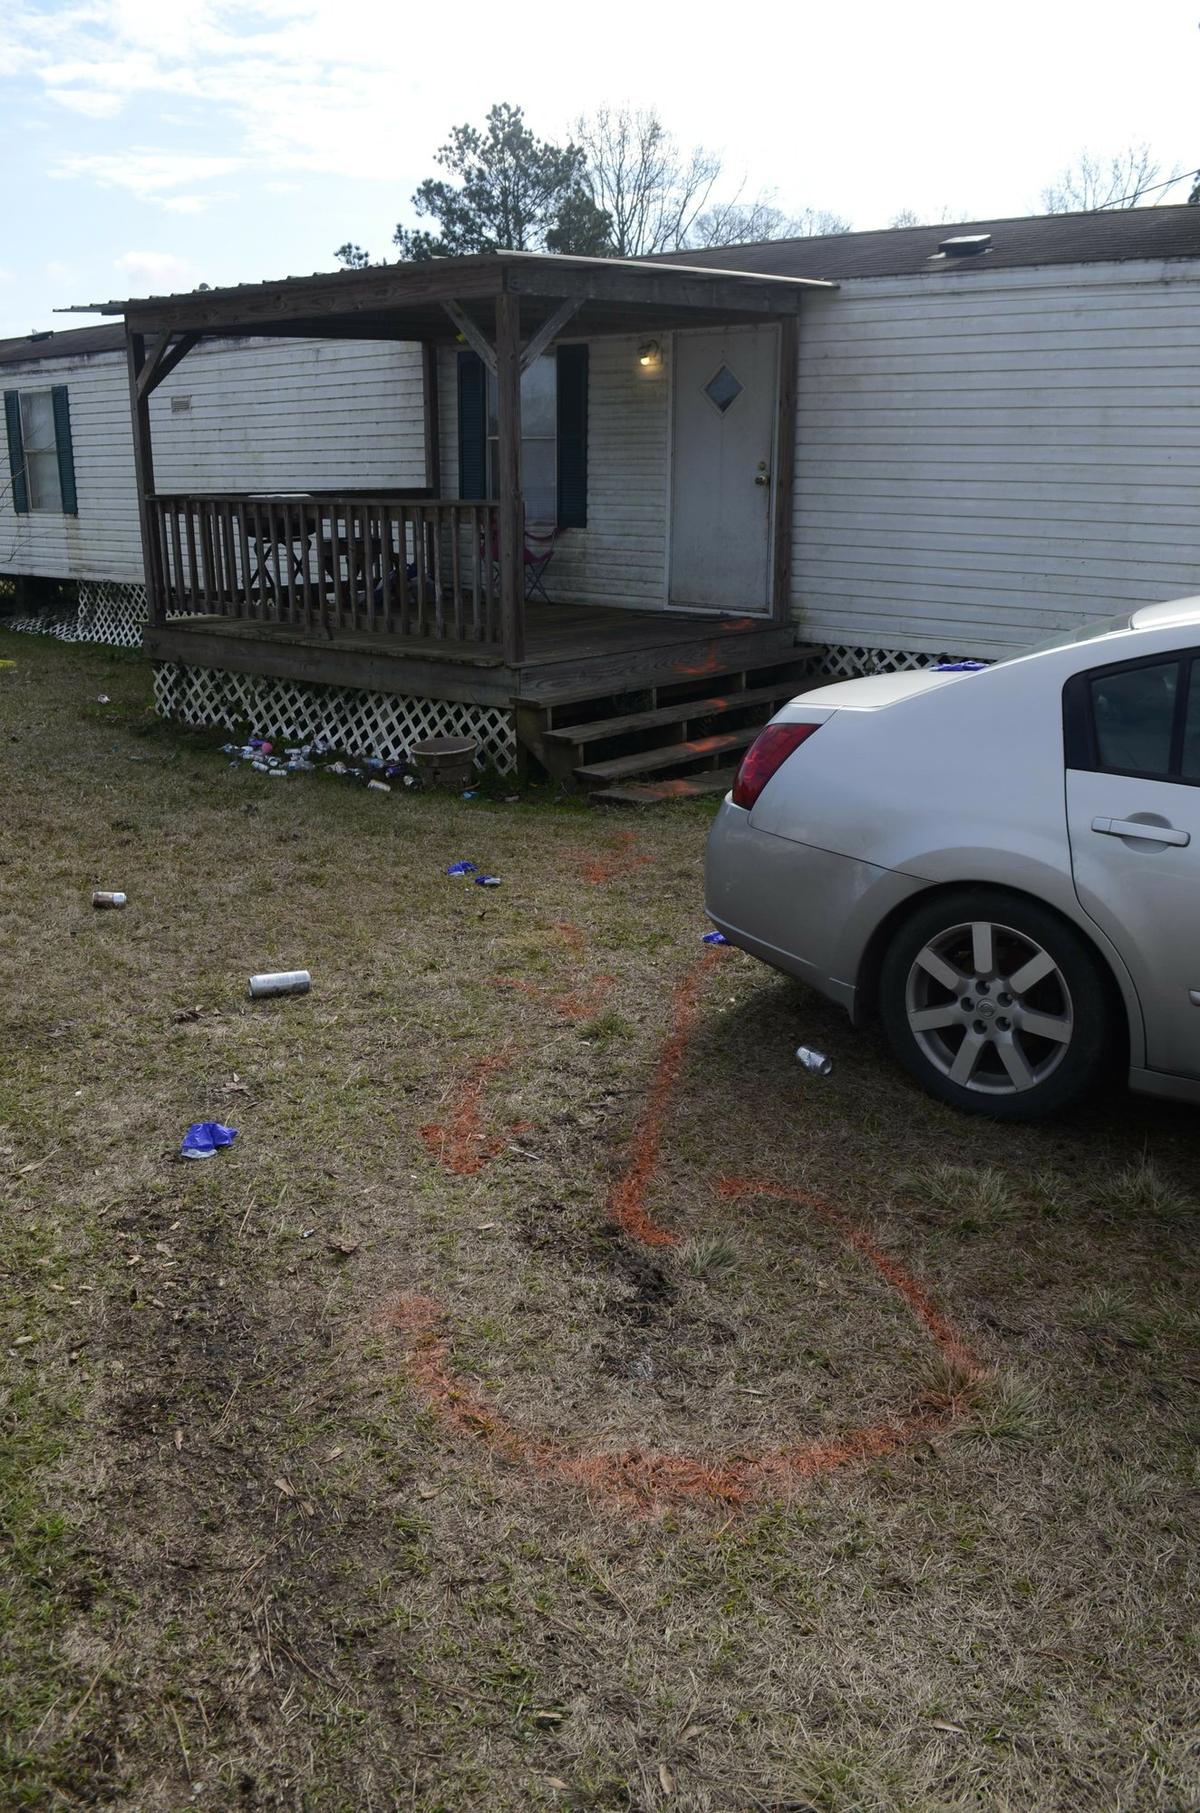 Orange spray paint, left by investigators, marks the steps from the front door of Ericka Hall's home in Magnolia, Miss., to a spot in her yard where she collapsed on Jan. 5, 2018. (Matt Williamson/The Enterprise-Journal via AP)